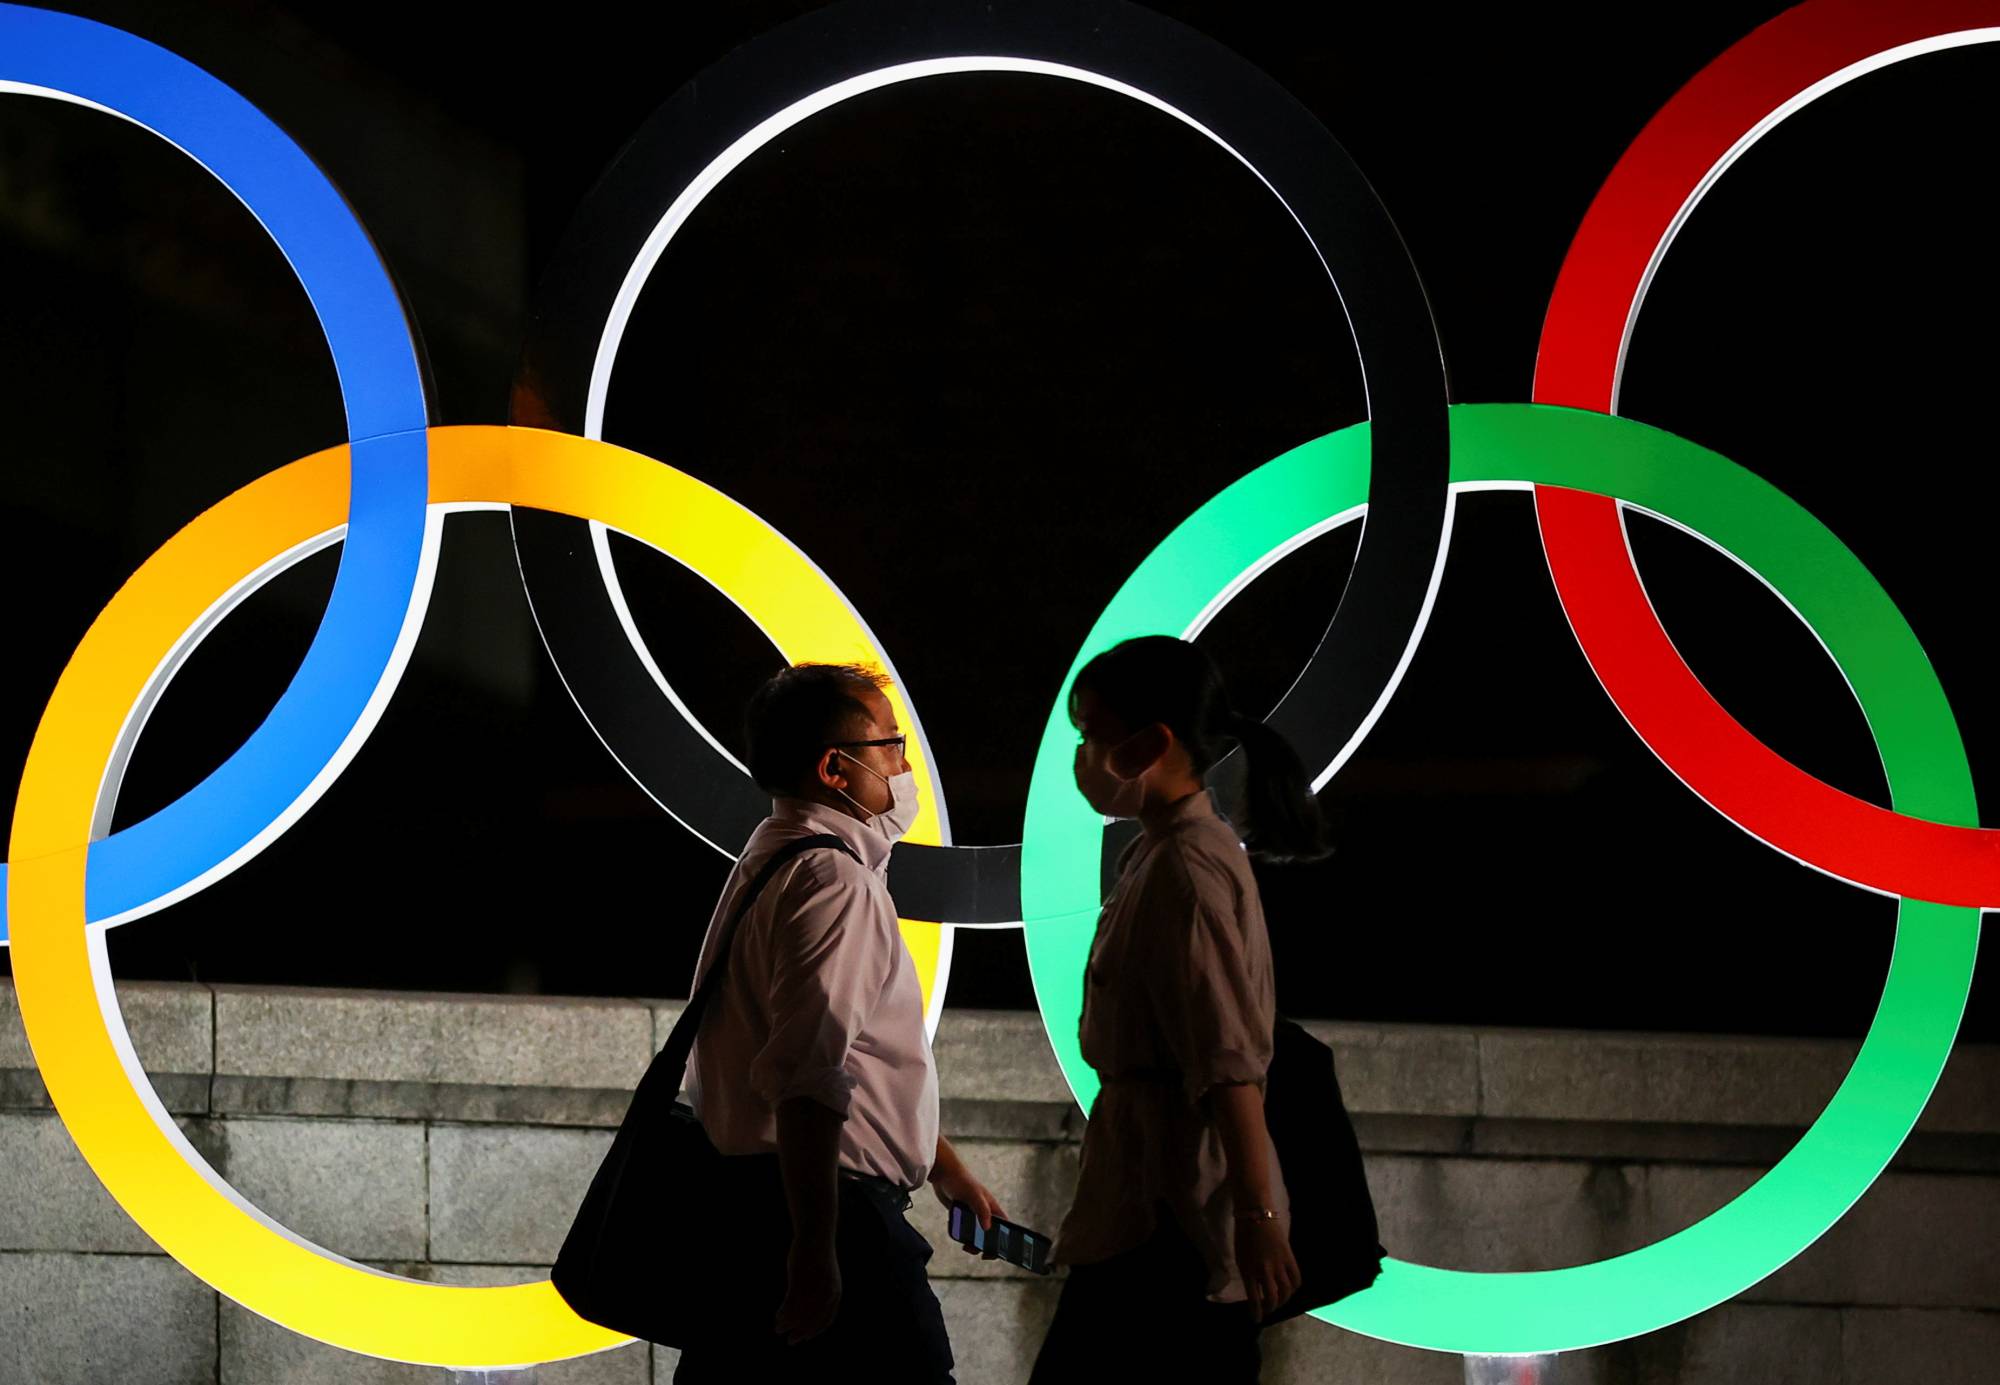 People wearing protective face masks walk past an illuminated Olympic rings monument during the Tokyo Games in the capital on Thursday. | REUTERS